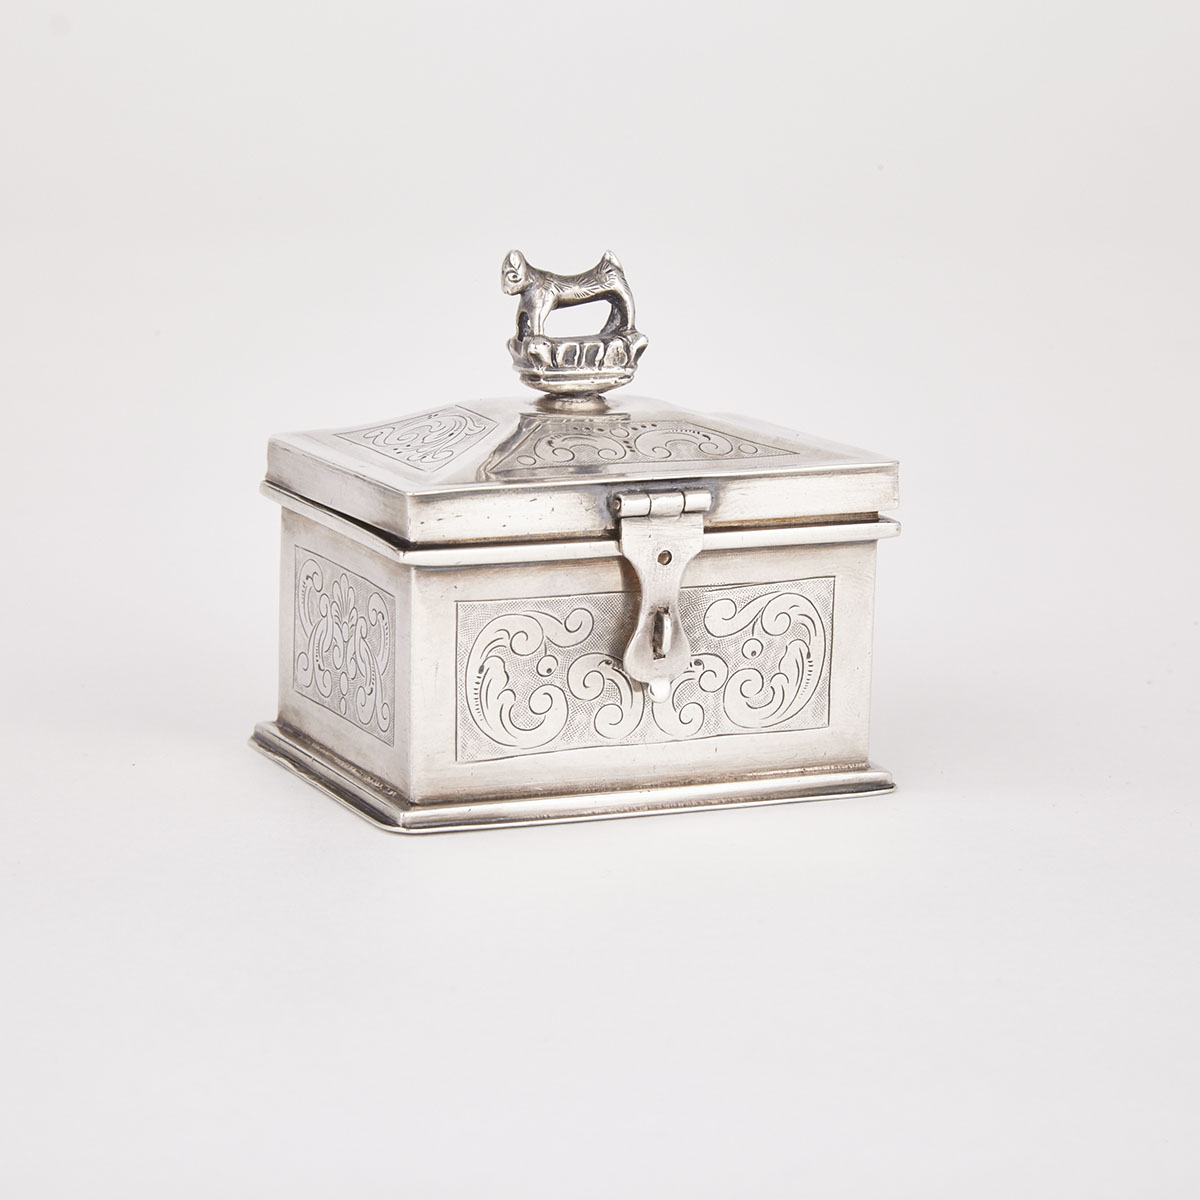 Spanish Silver Traveling Inkwell, F. Farrés, early 19th century